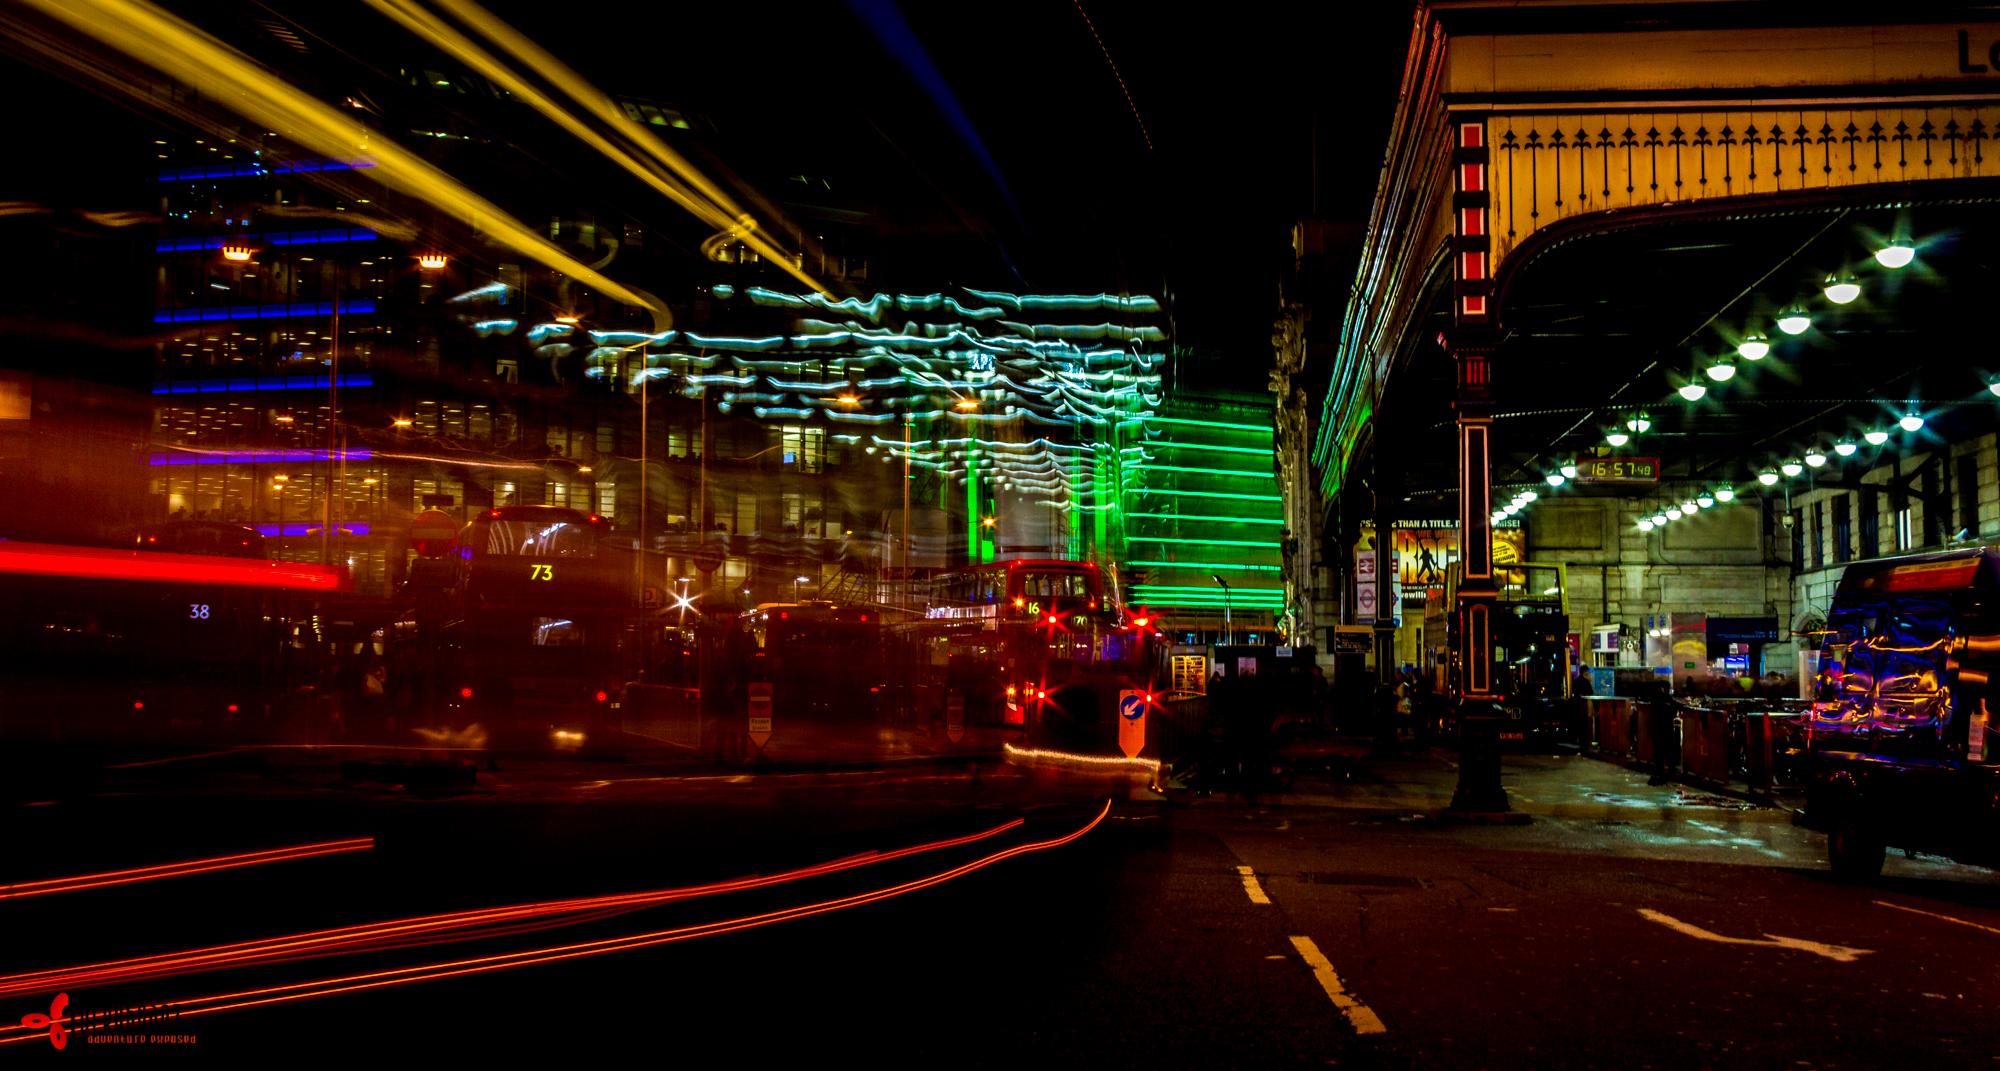 The light show at Victoria station.